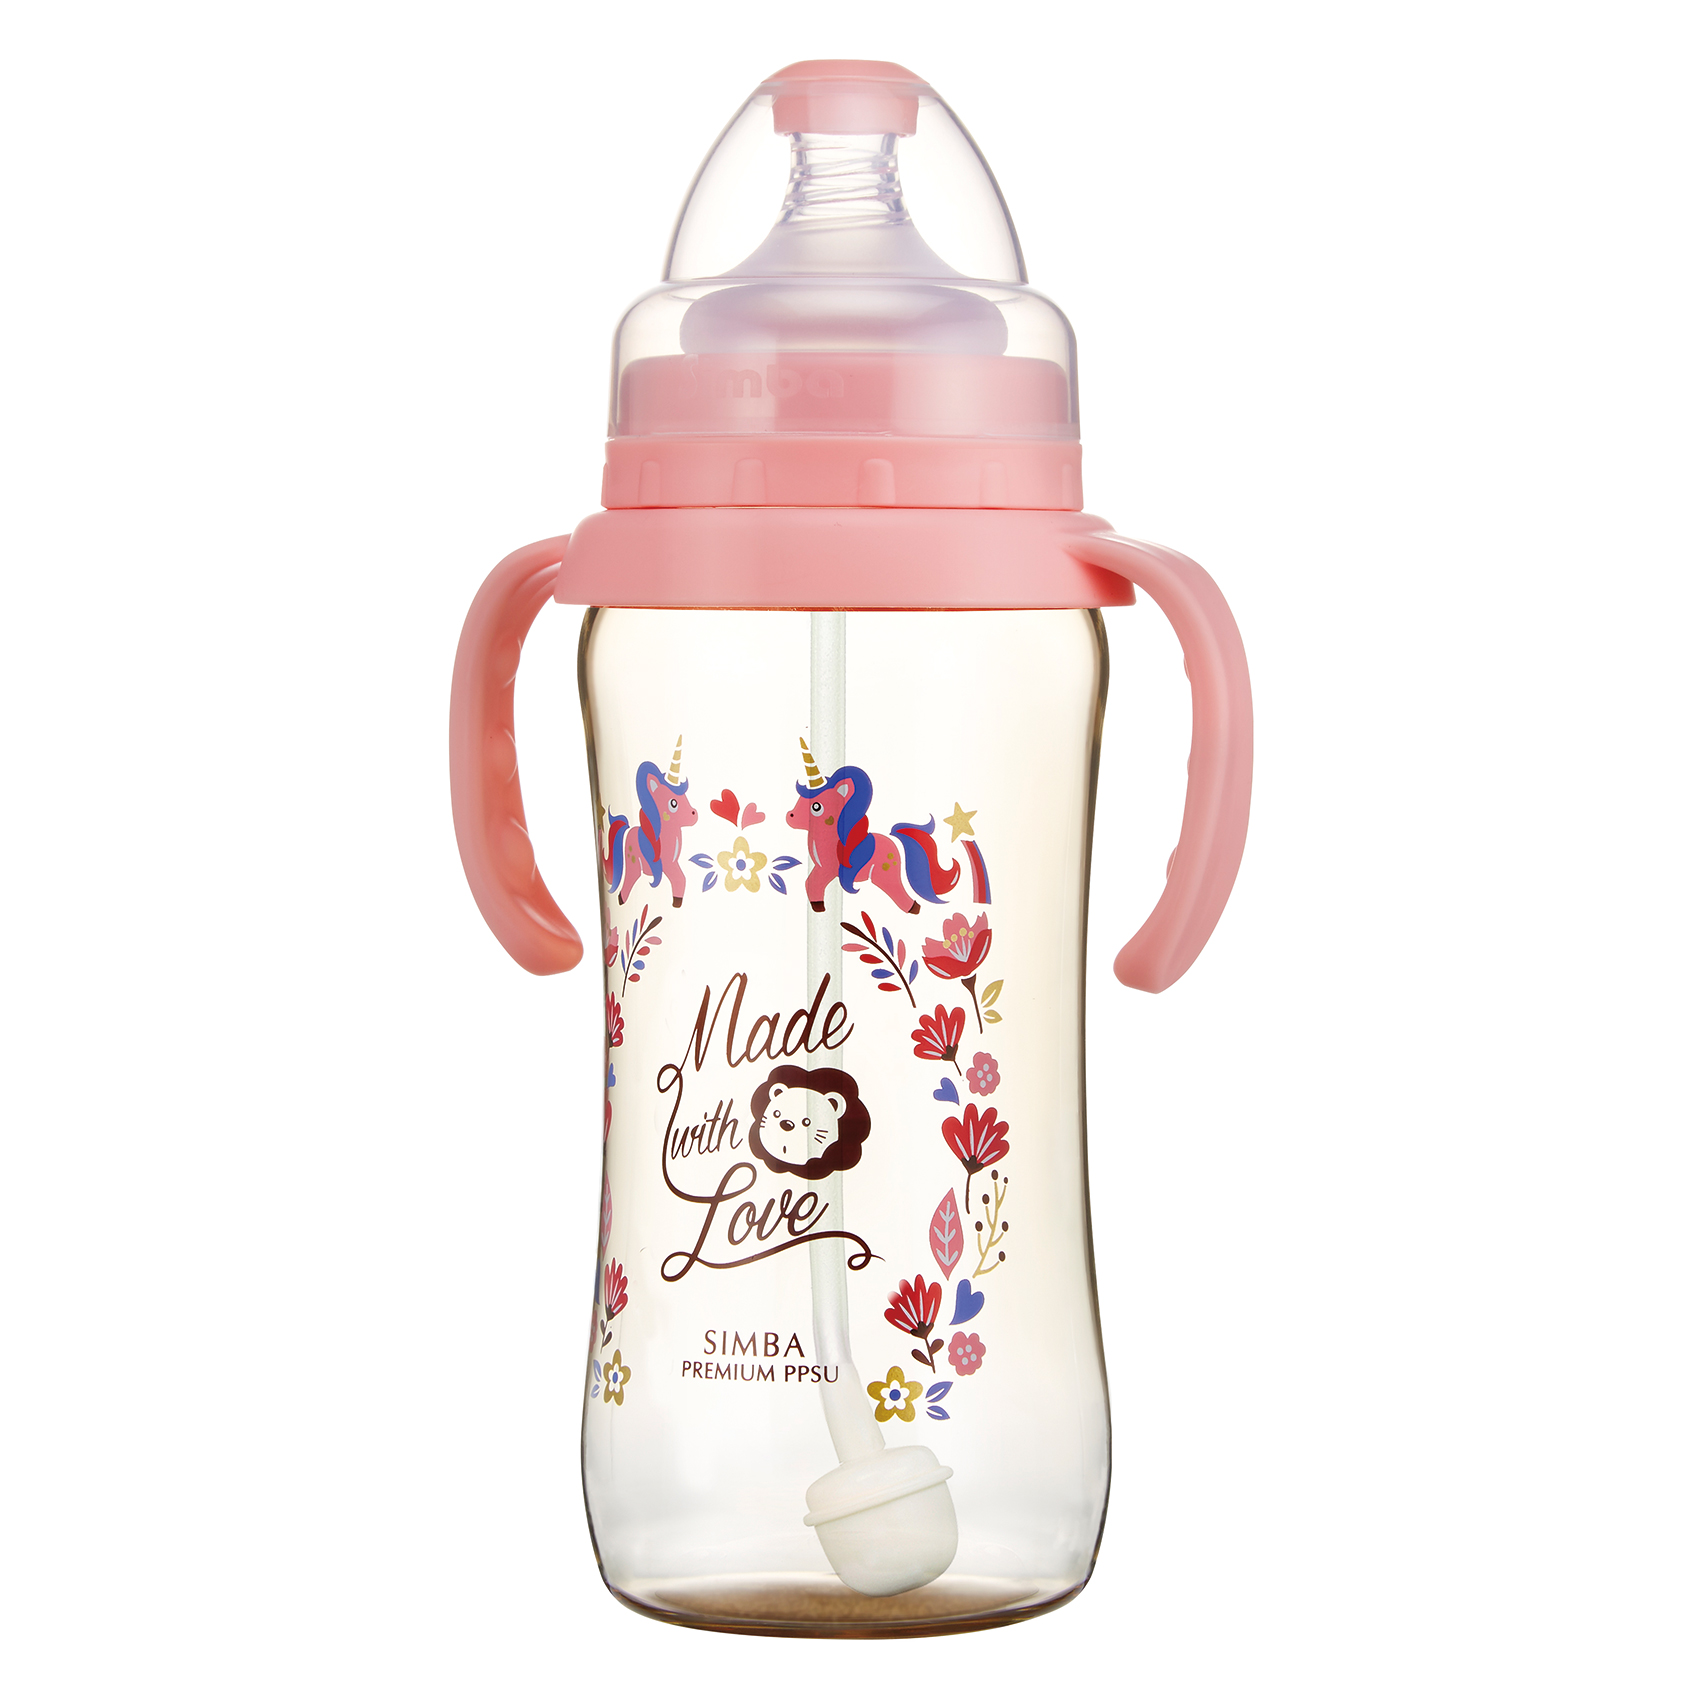 Simba Premium 12 oz PPSU Wide Neck Feeding Bottle with Handle and Weight Straw (Pink, Stage 1 Nipple)